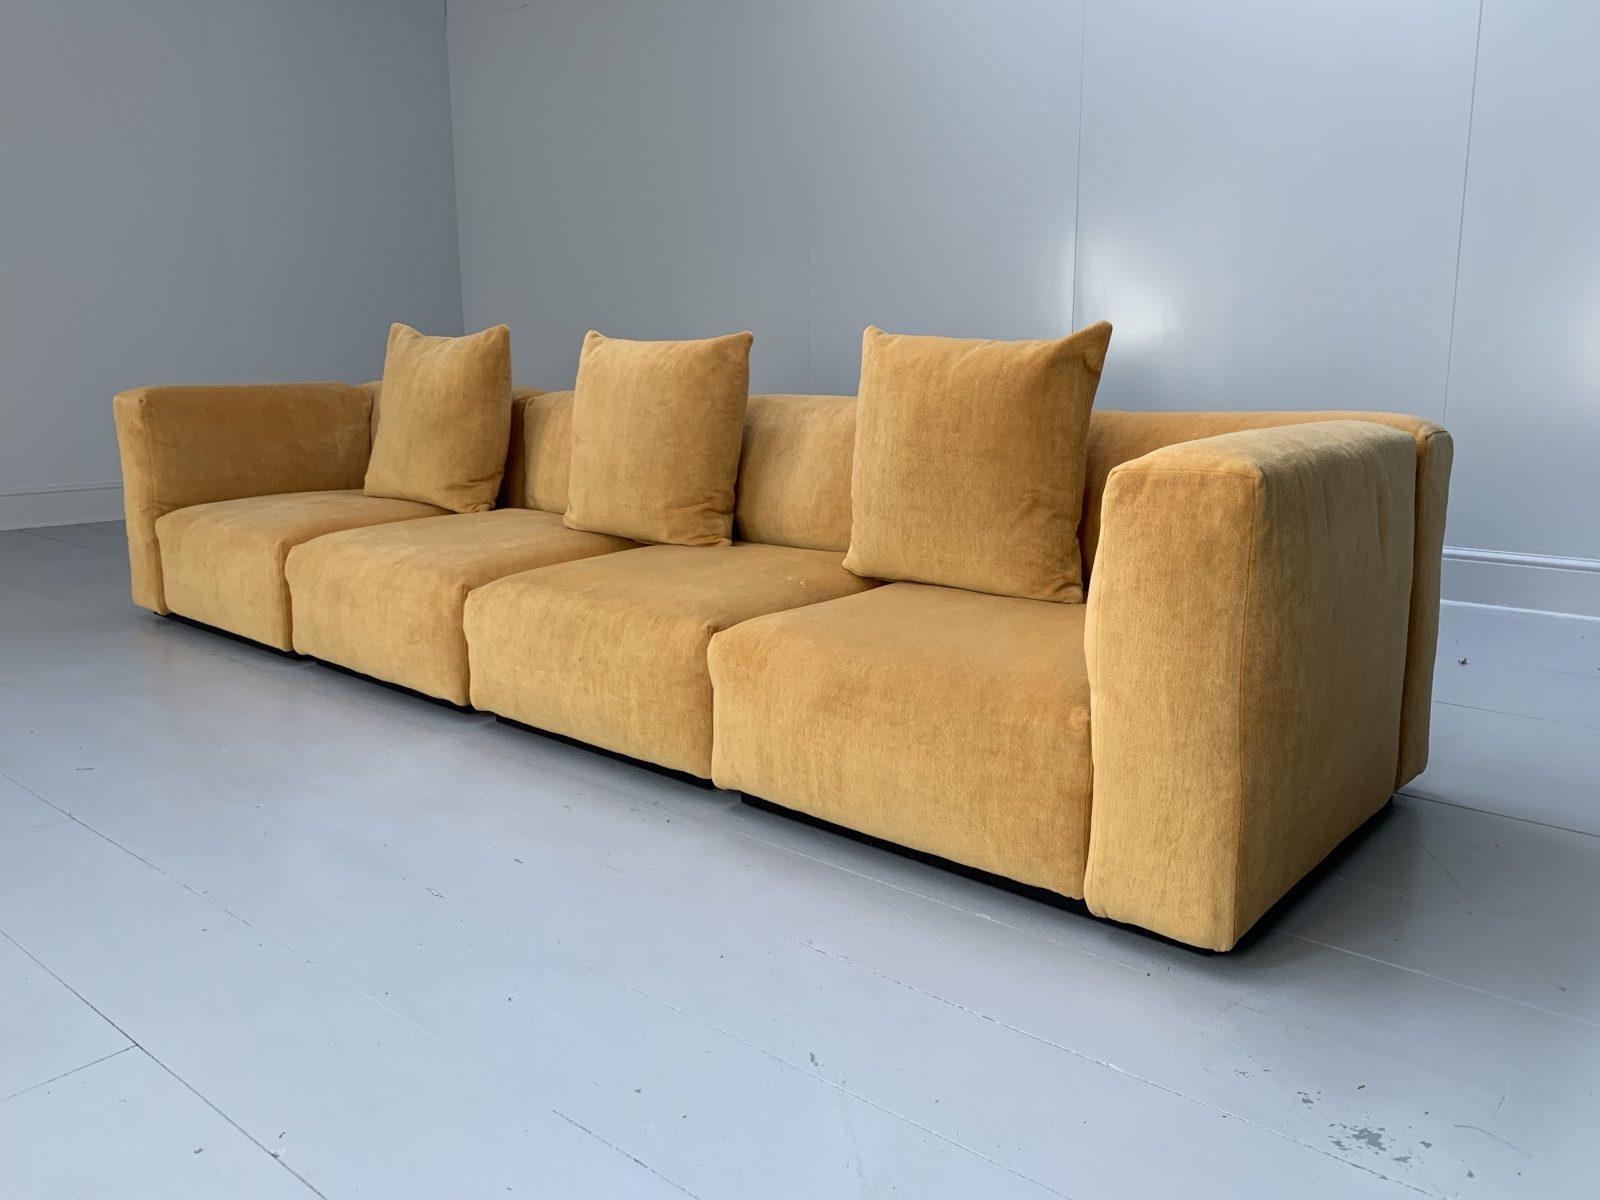 Cassina “271 Mex Cube” 4-Seat Sectional Sofa in Gold Mohair Velvet In Good Condition For Sale In Barrowford, GB